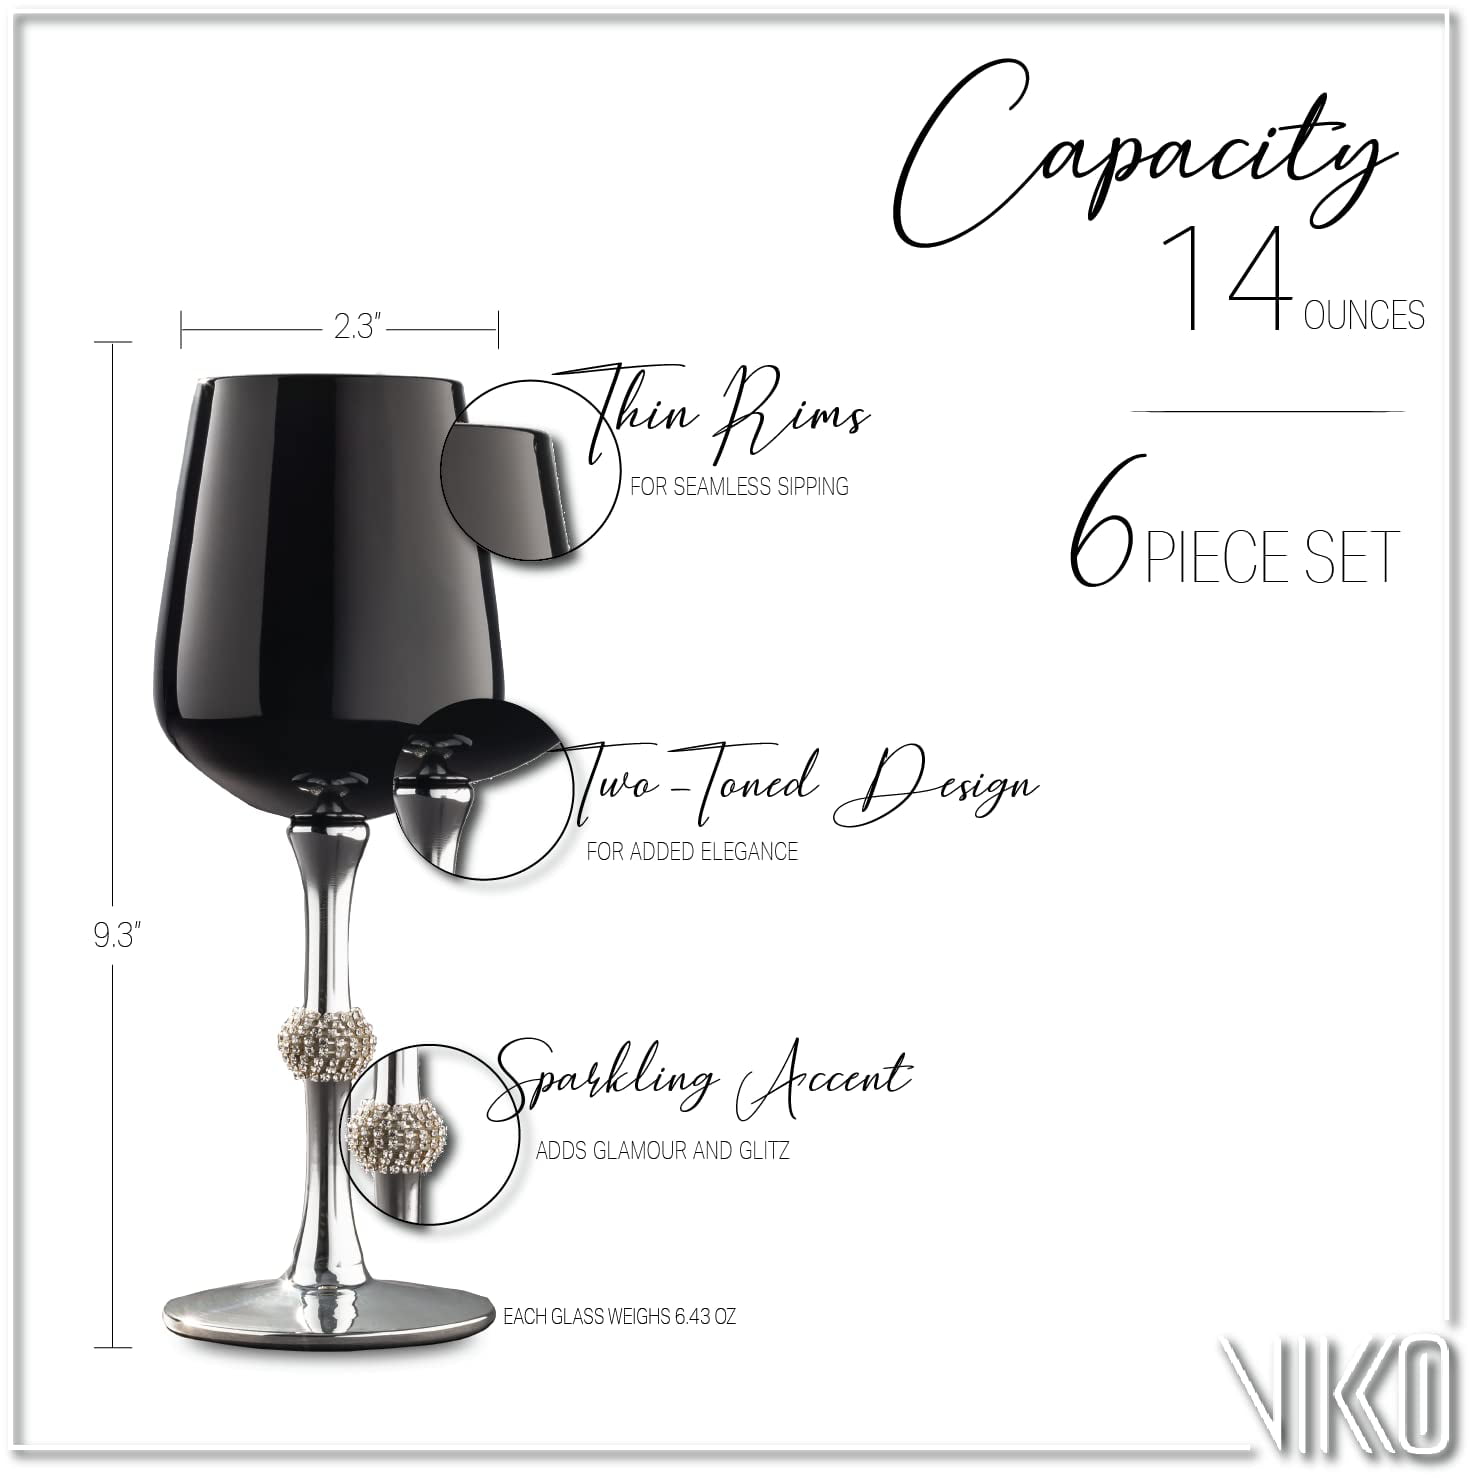 Vikko Décor Silver Ombre Red Wine Glasses  Thin, Handblown Glass – Tall,  Elegant Stem – Dishwasher Safe – 21 Ounce Cup – Great Gift Idea – Set of 8 Wine  Glasses 